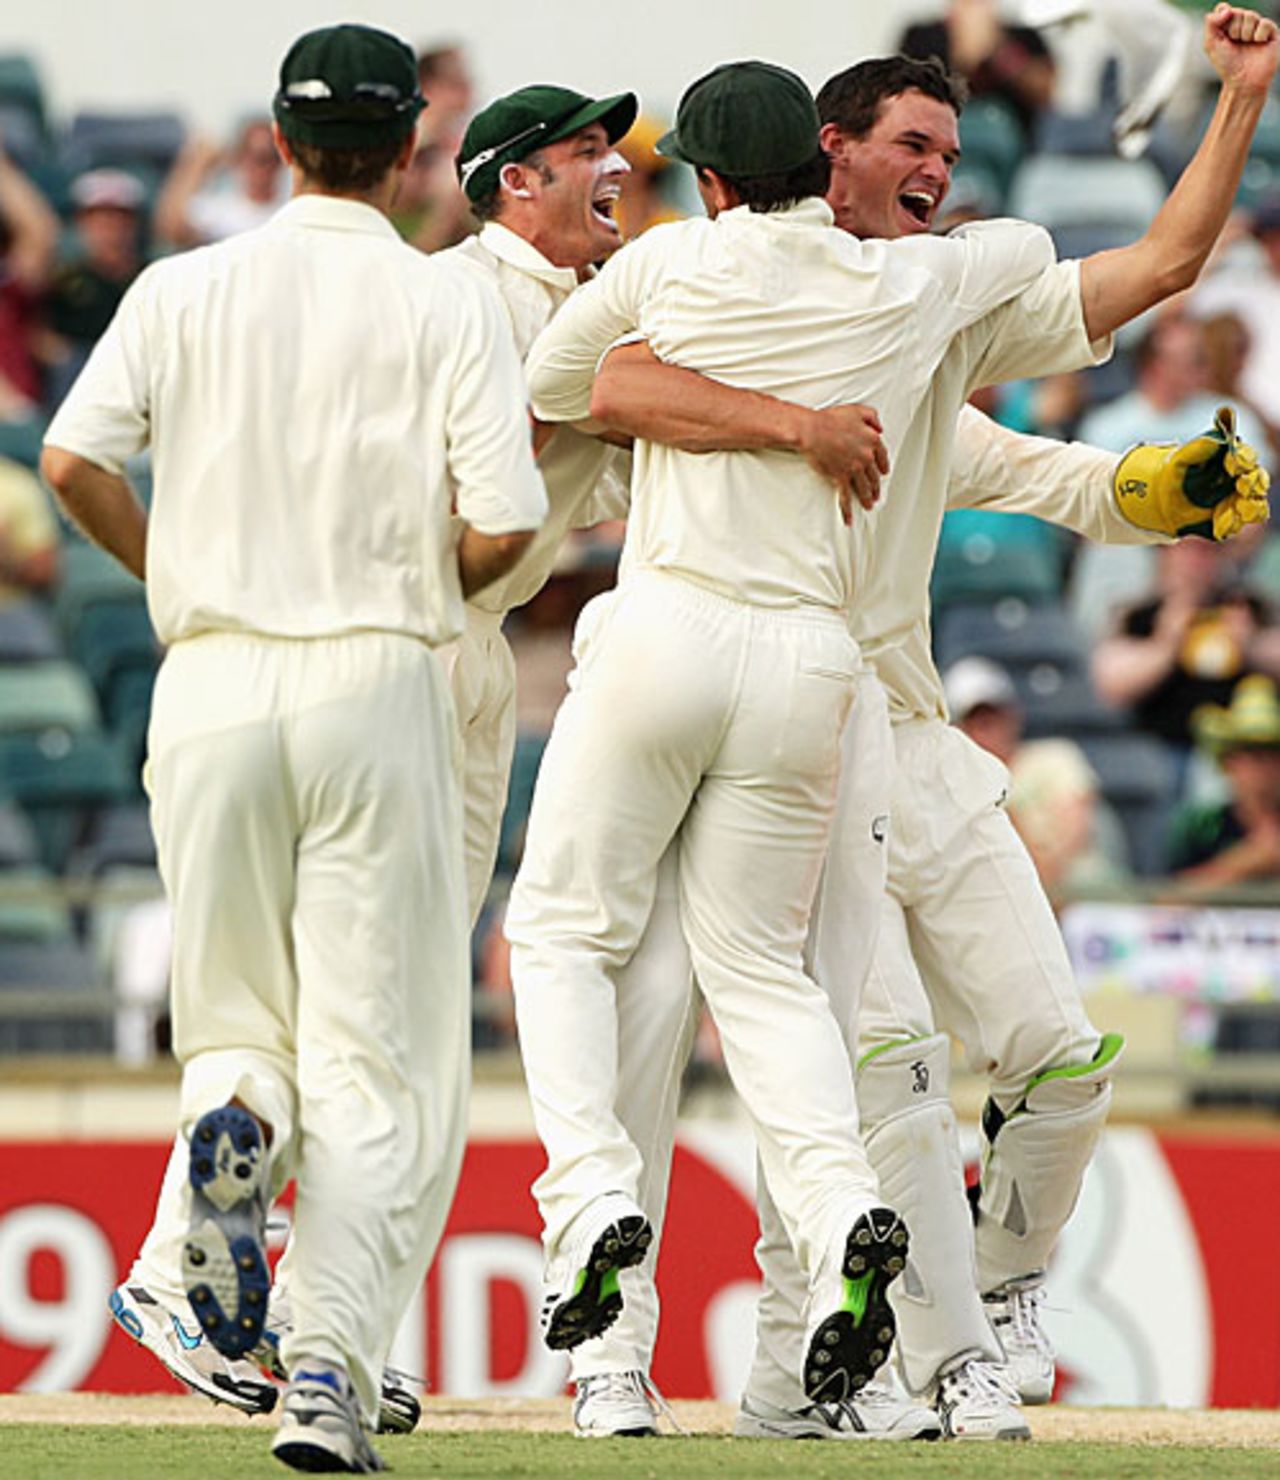 Clint McKay celebrates before UDRS declares Denesh Ramdin is not out, Australia v West Indies, 3rd Test, Perth, 4th day, December 19, 2009